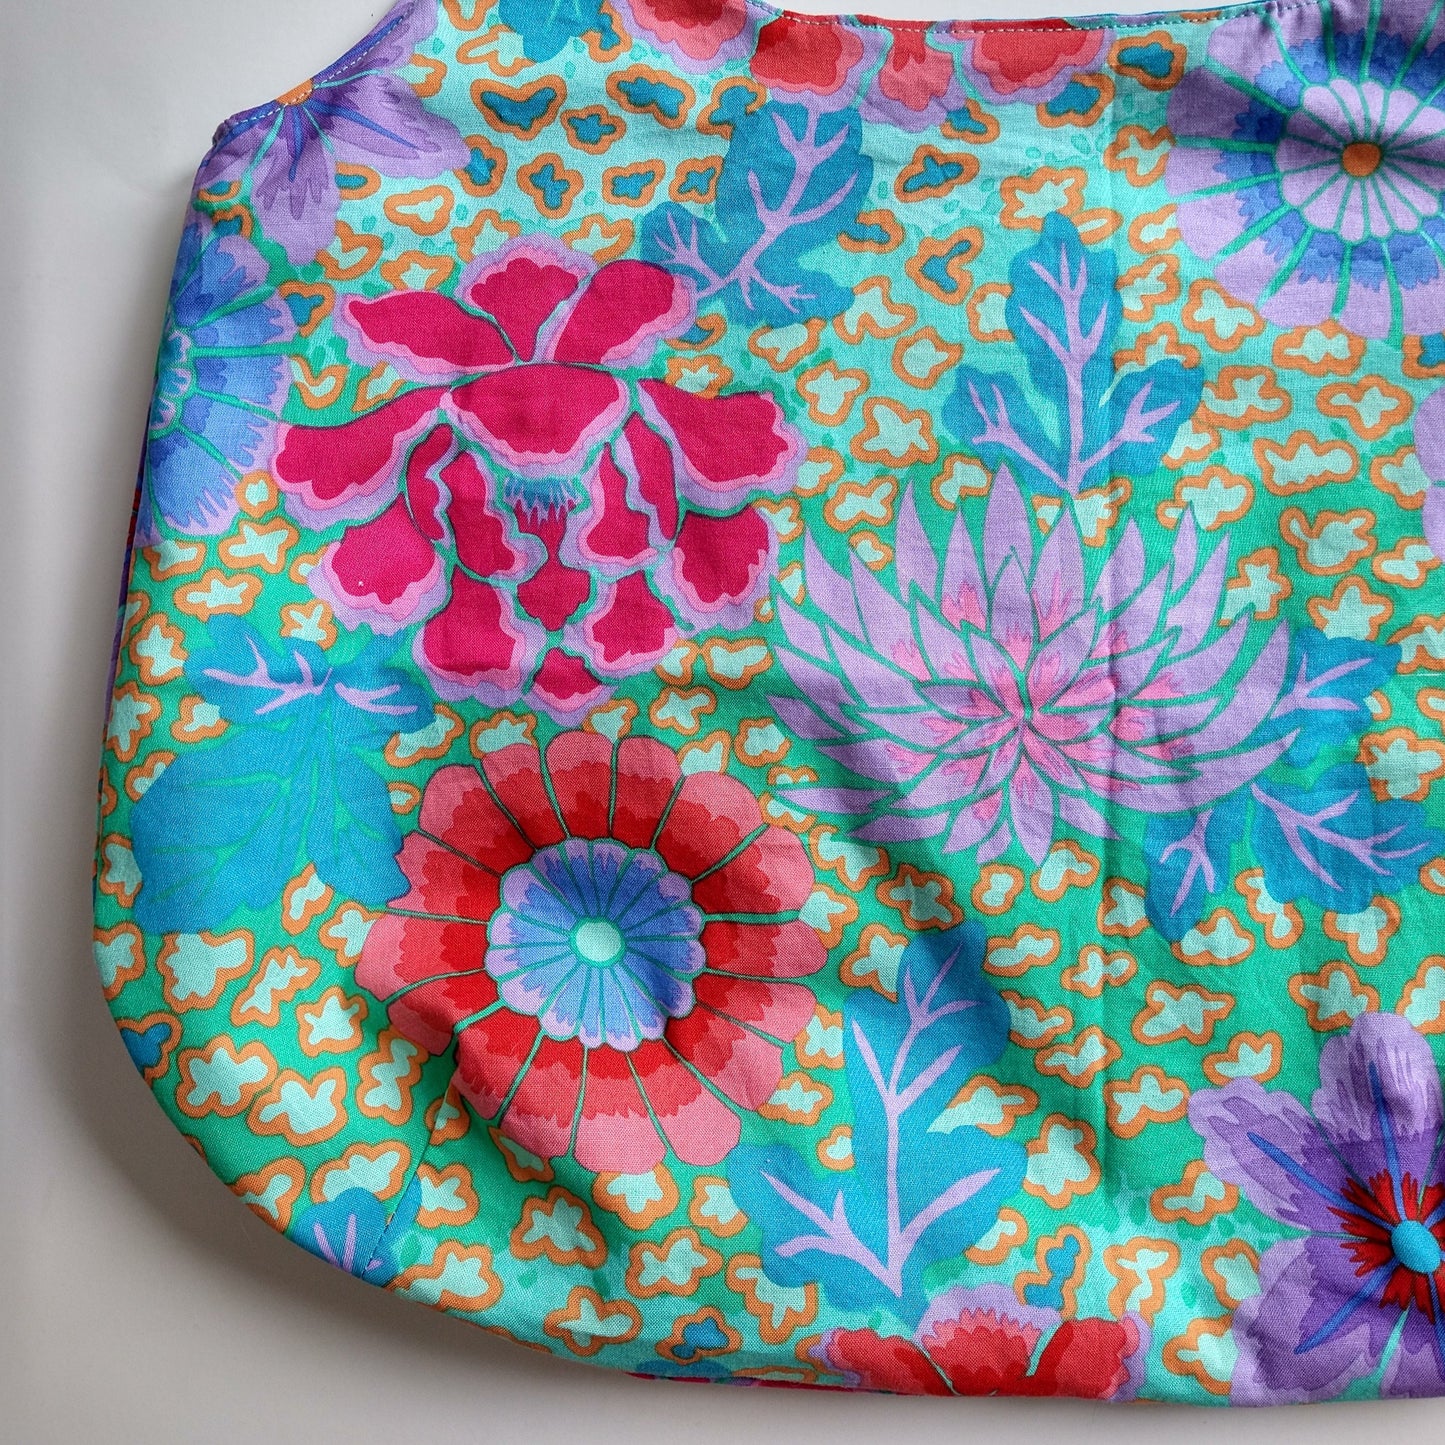 Shopping bag, reversible, size small, colorful flowers allover (Handmade in Canada)